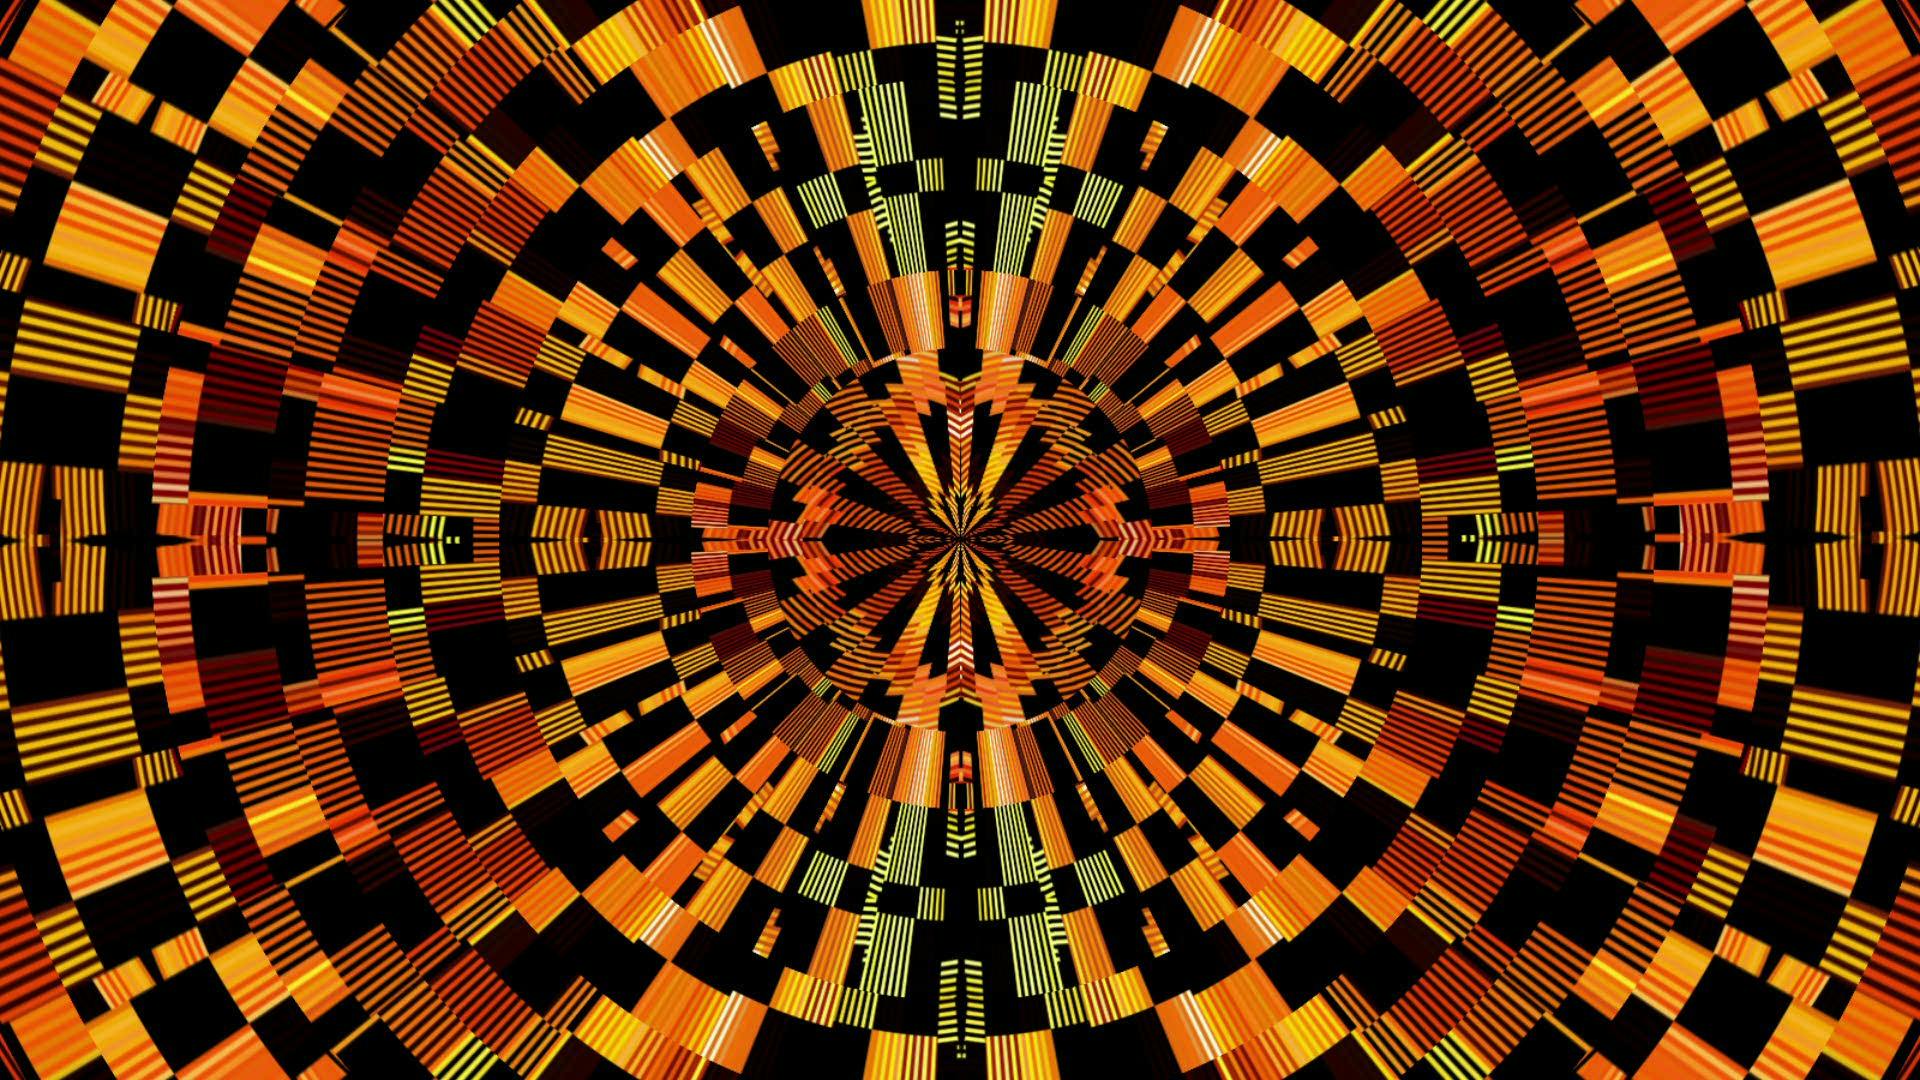 Four-sided kaleidoscopic patterns of yellow and orange rectangles